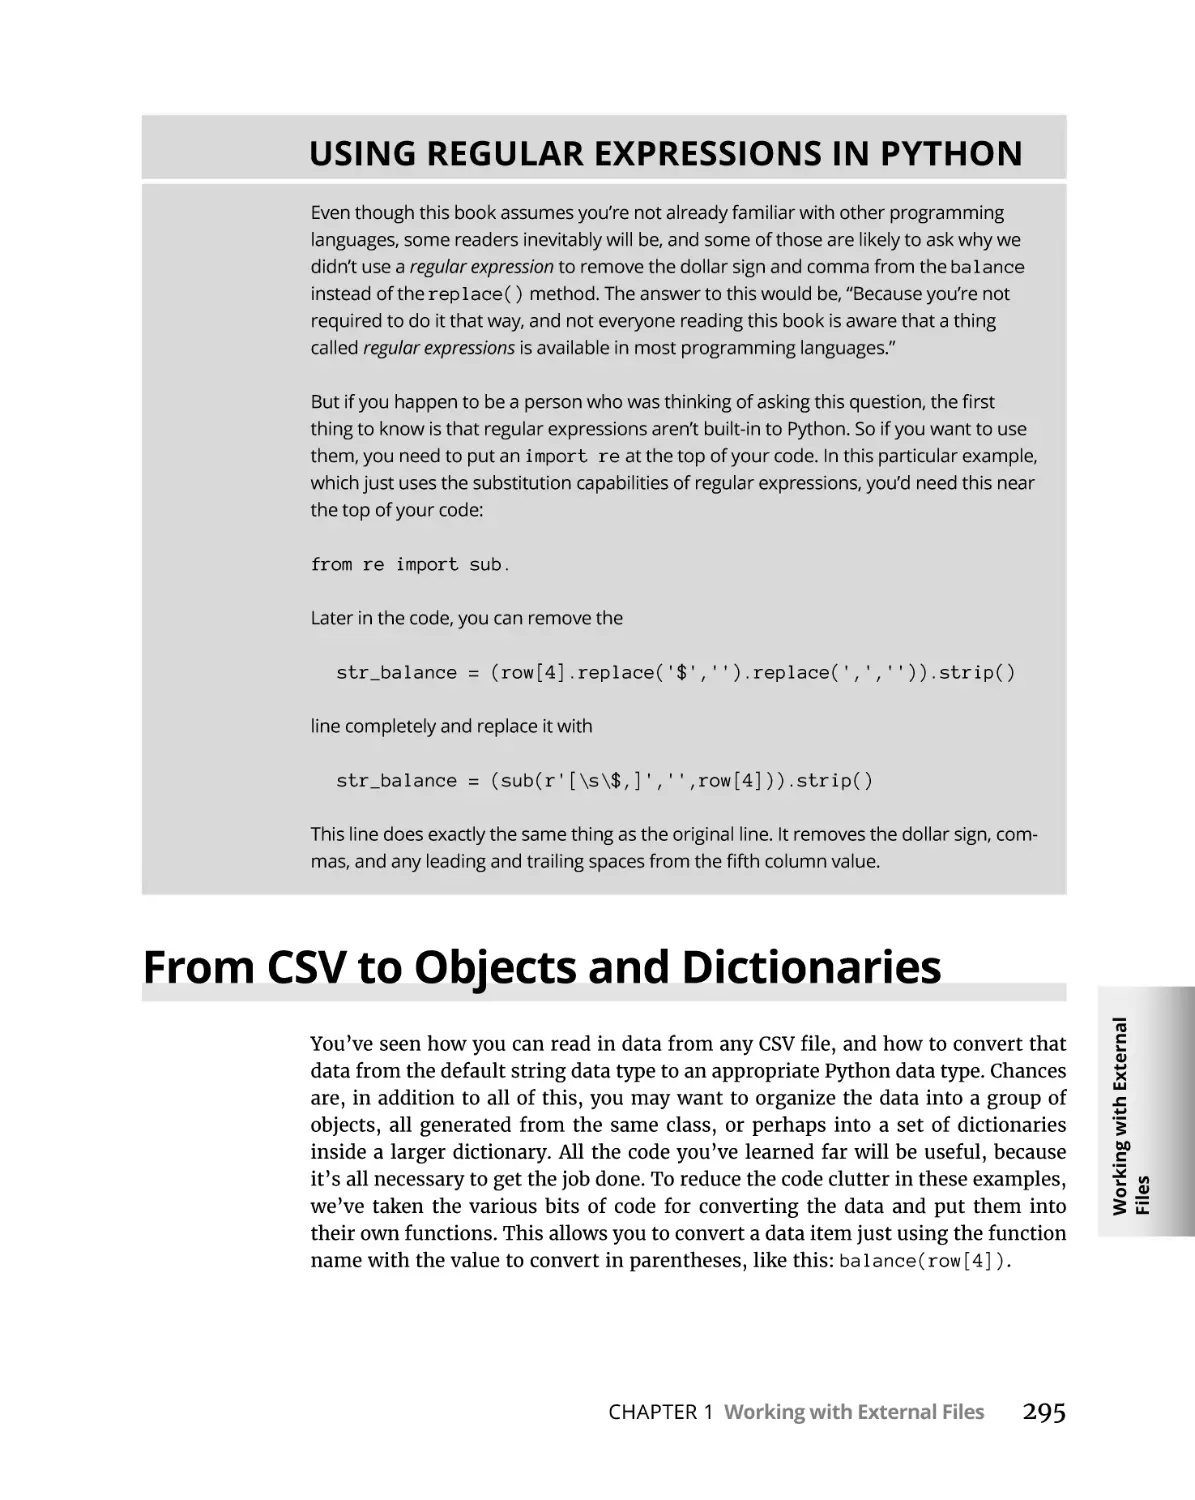 From CSV to Objects and Dictionaries